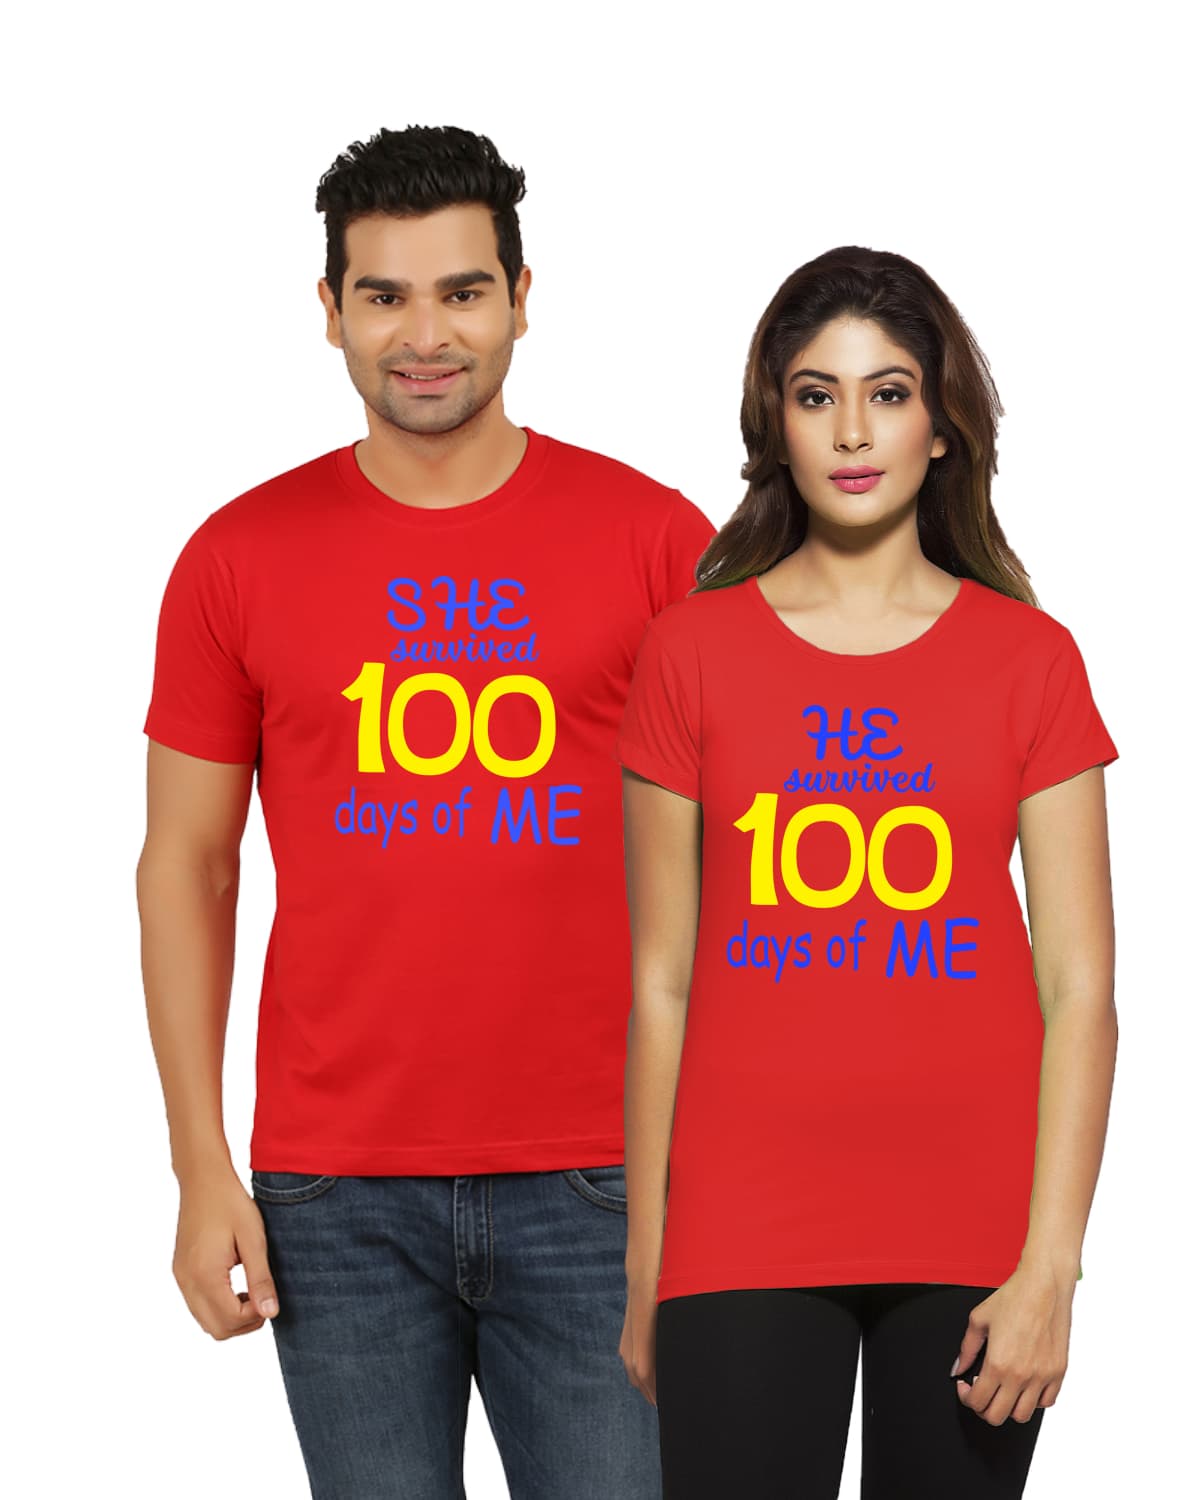 100 Day Anniversary couple tshirts red